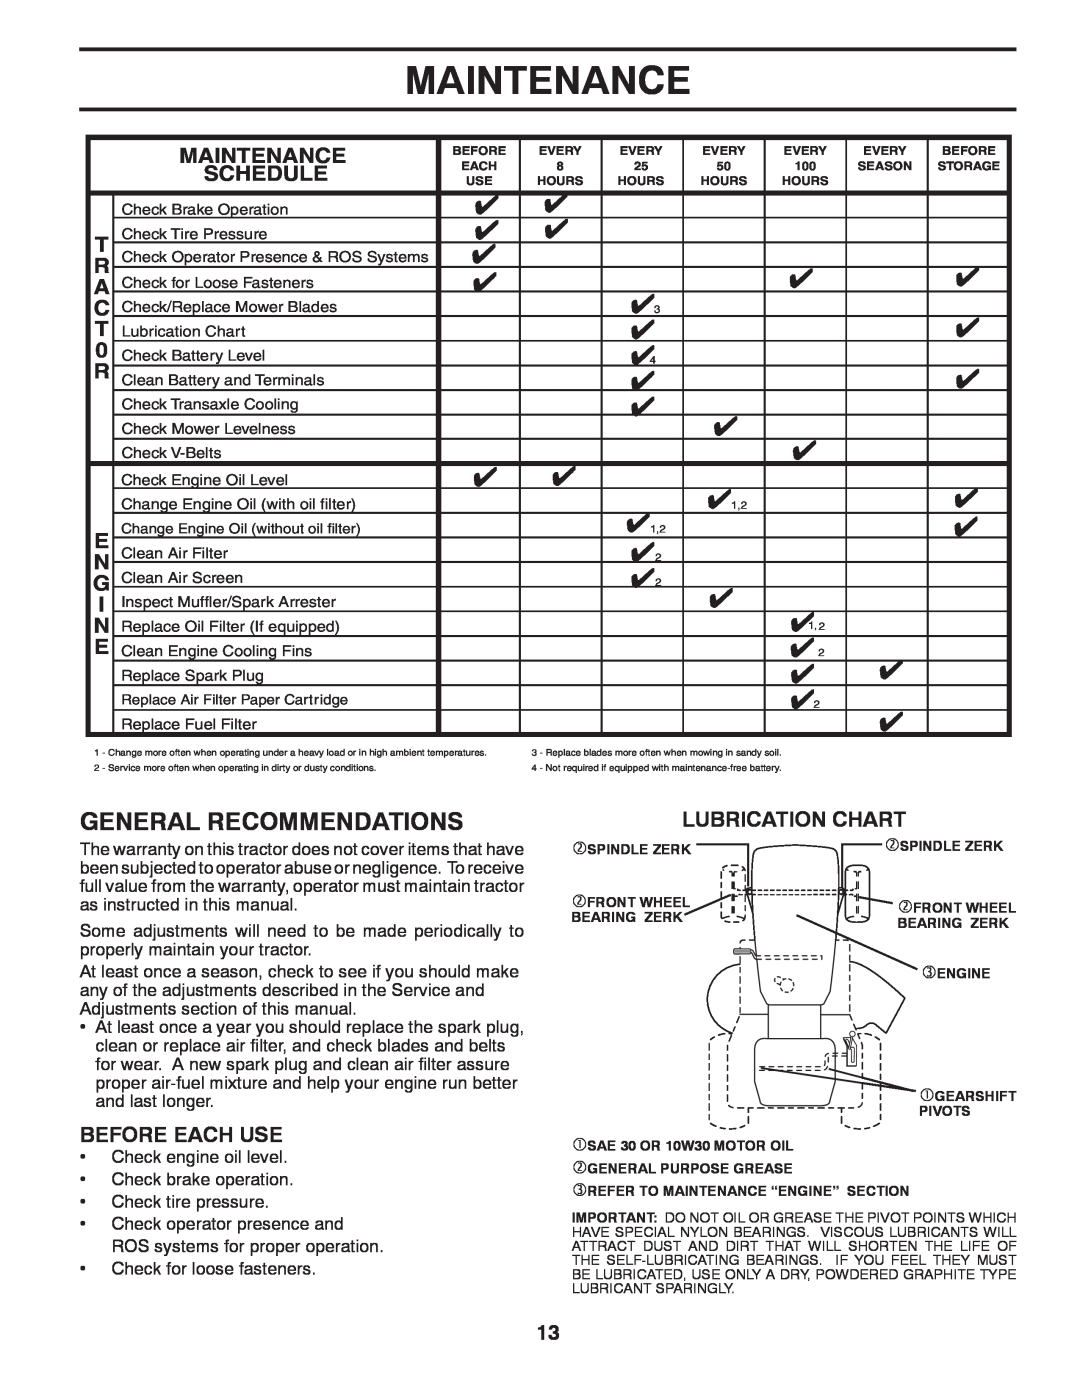 Poulan 96016002400, 532 43 88-17 manual Maintenance, General Recommendations, Schedule, Before Each Use, Lubrication Chart 